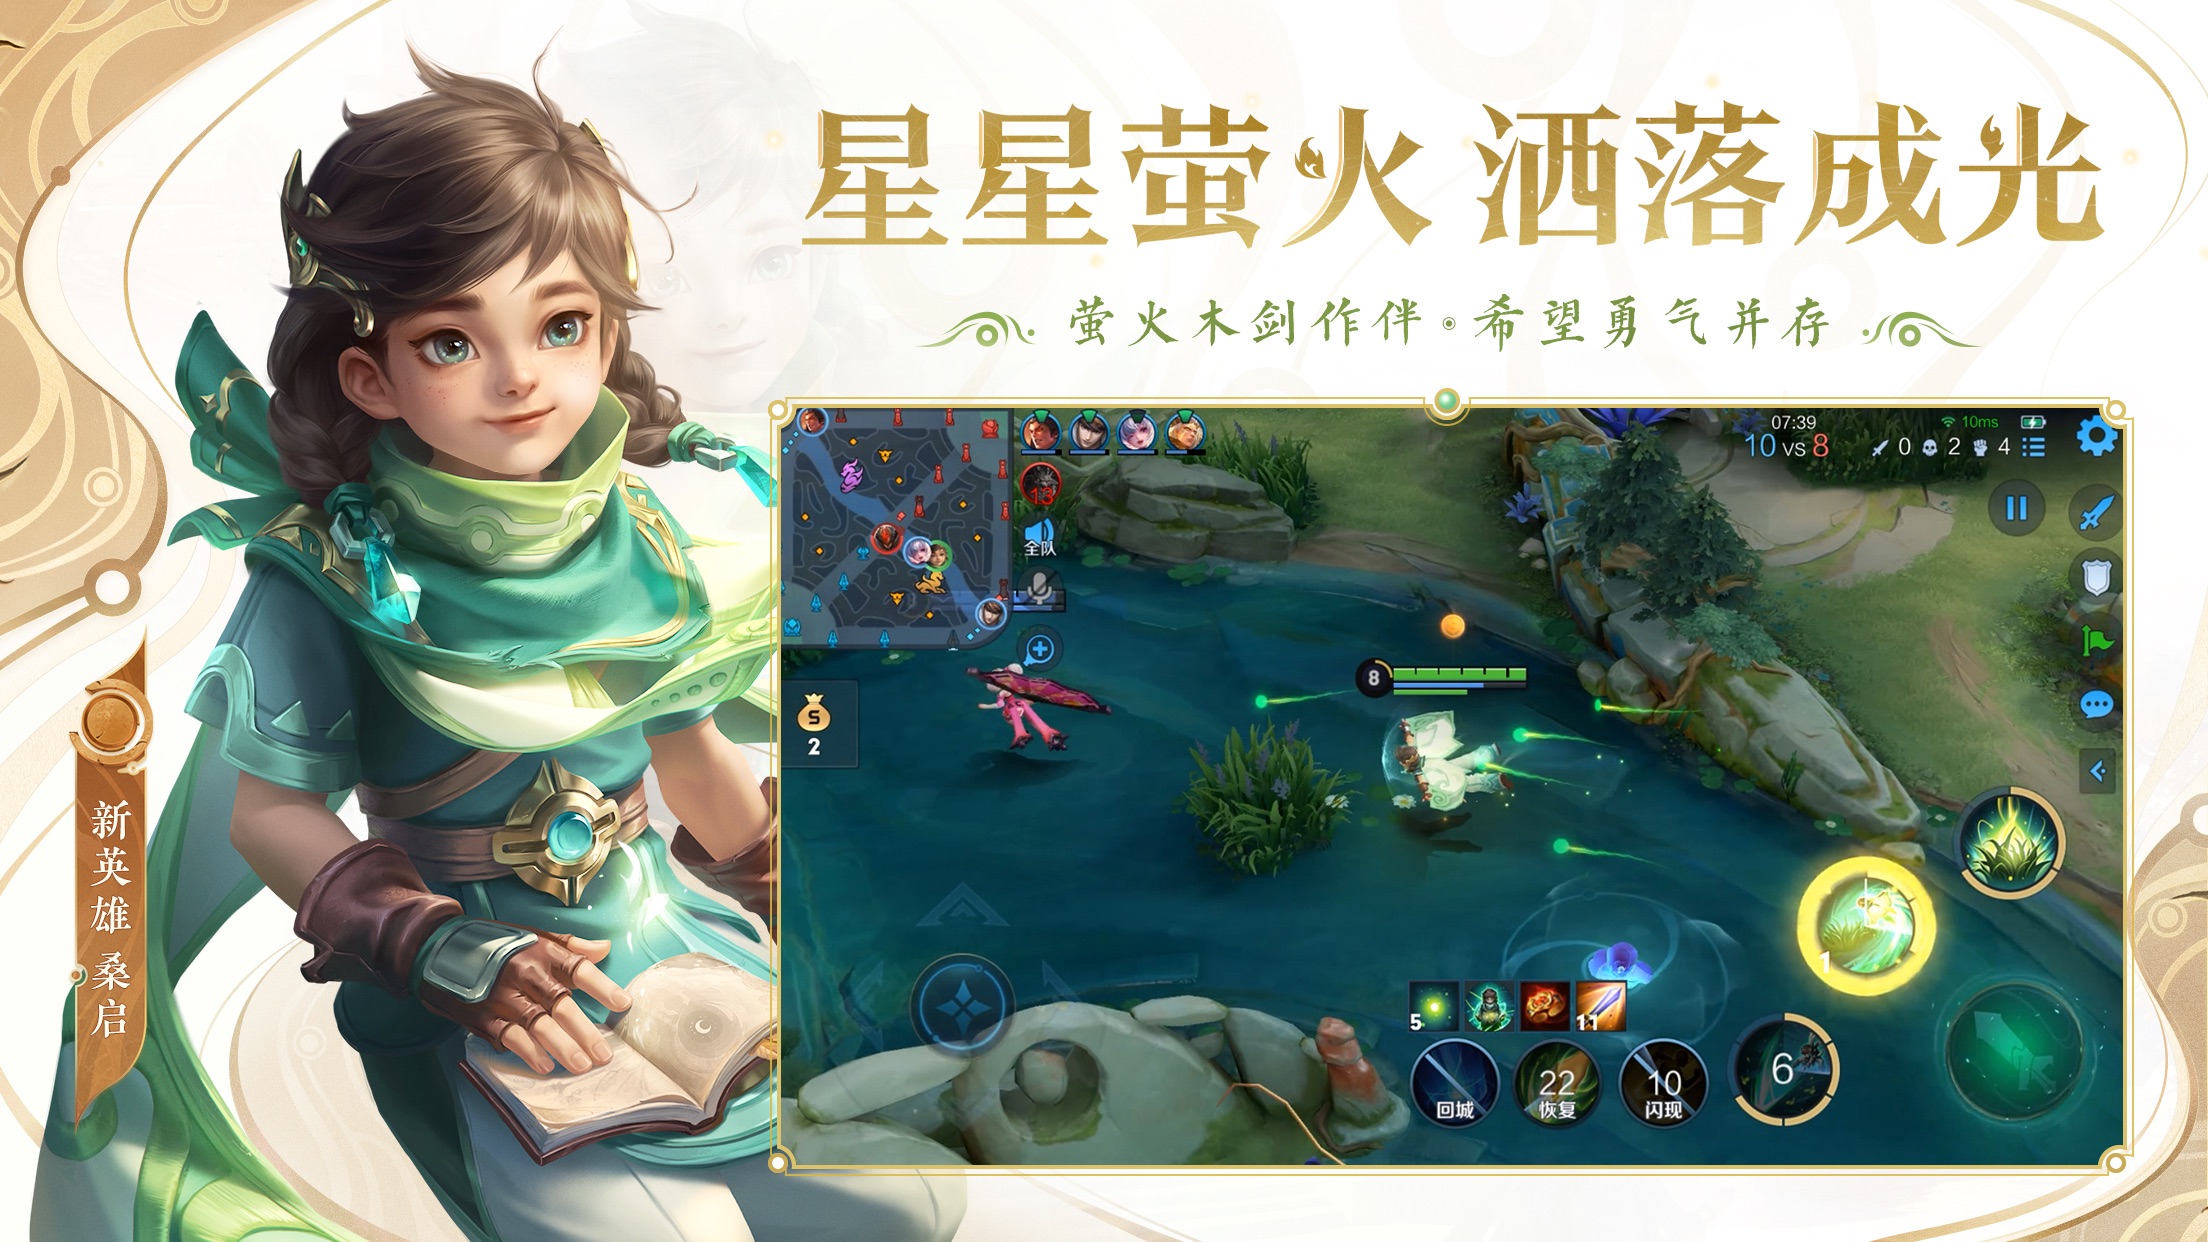 Download and play Honor of Kings on PC with MuMu Player